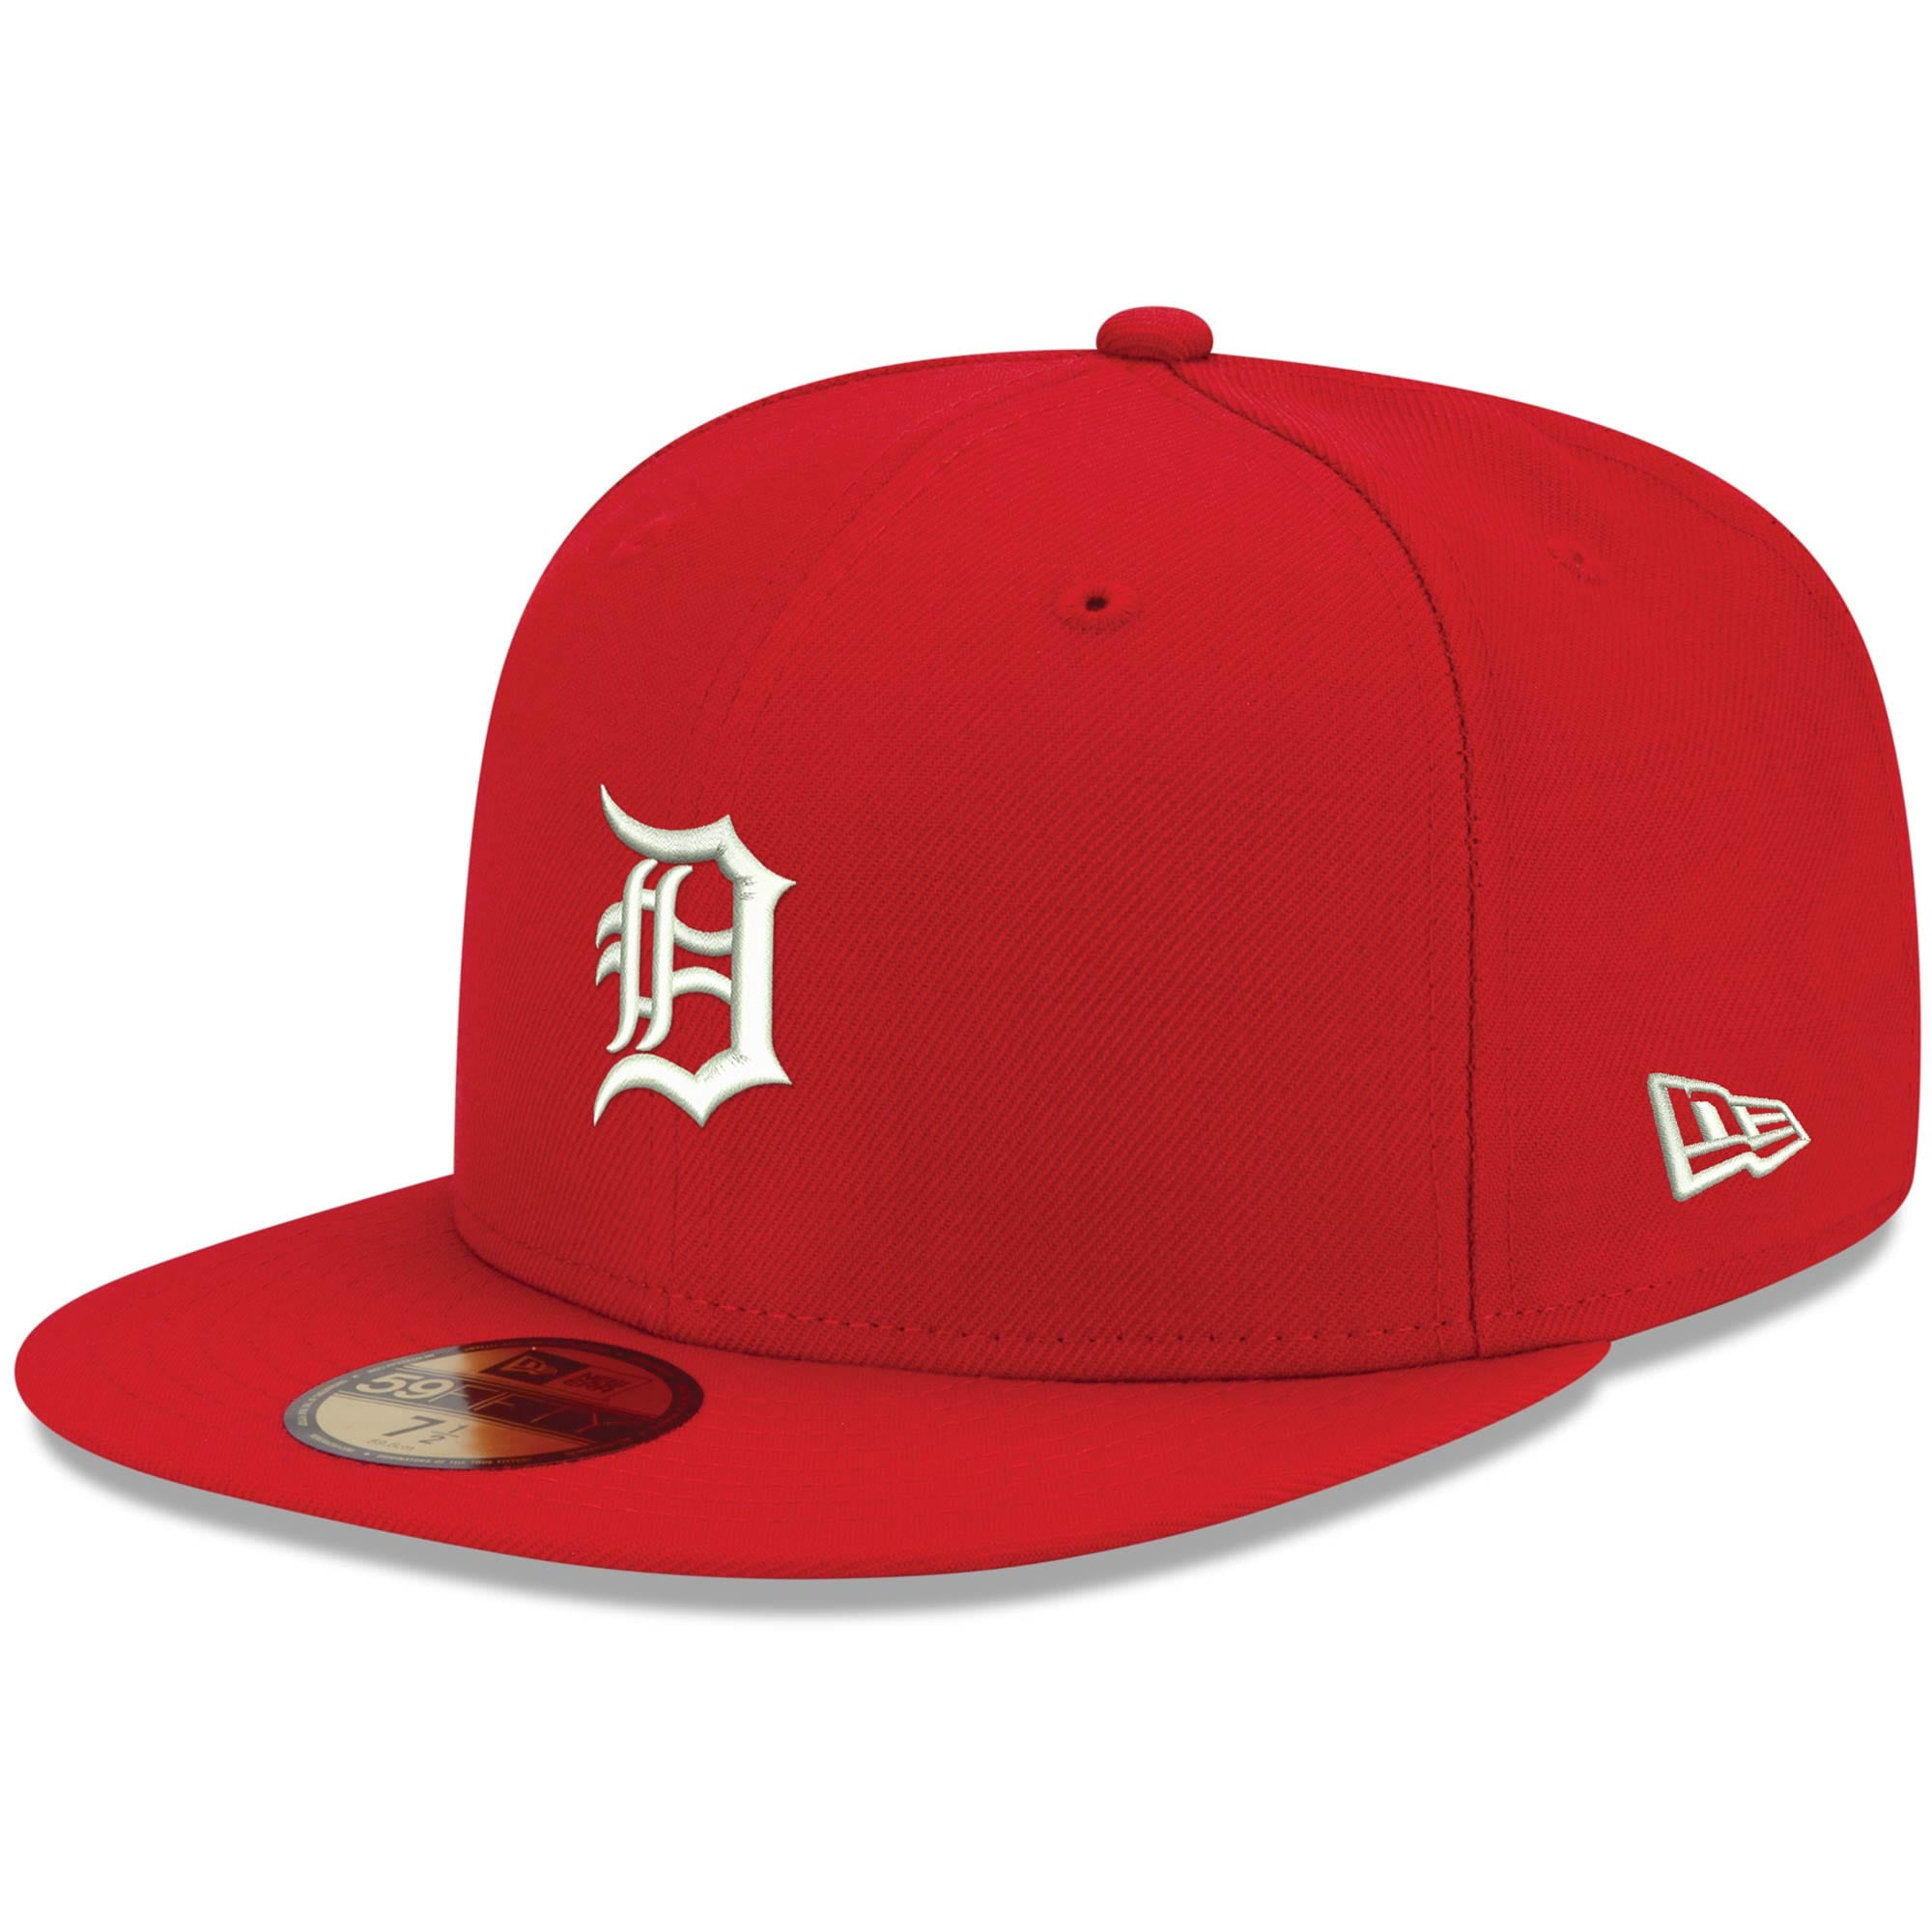 Men's New Era Red Detroit Tigers White Logo 59FIFTY Fitted Hat